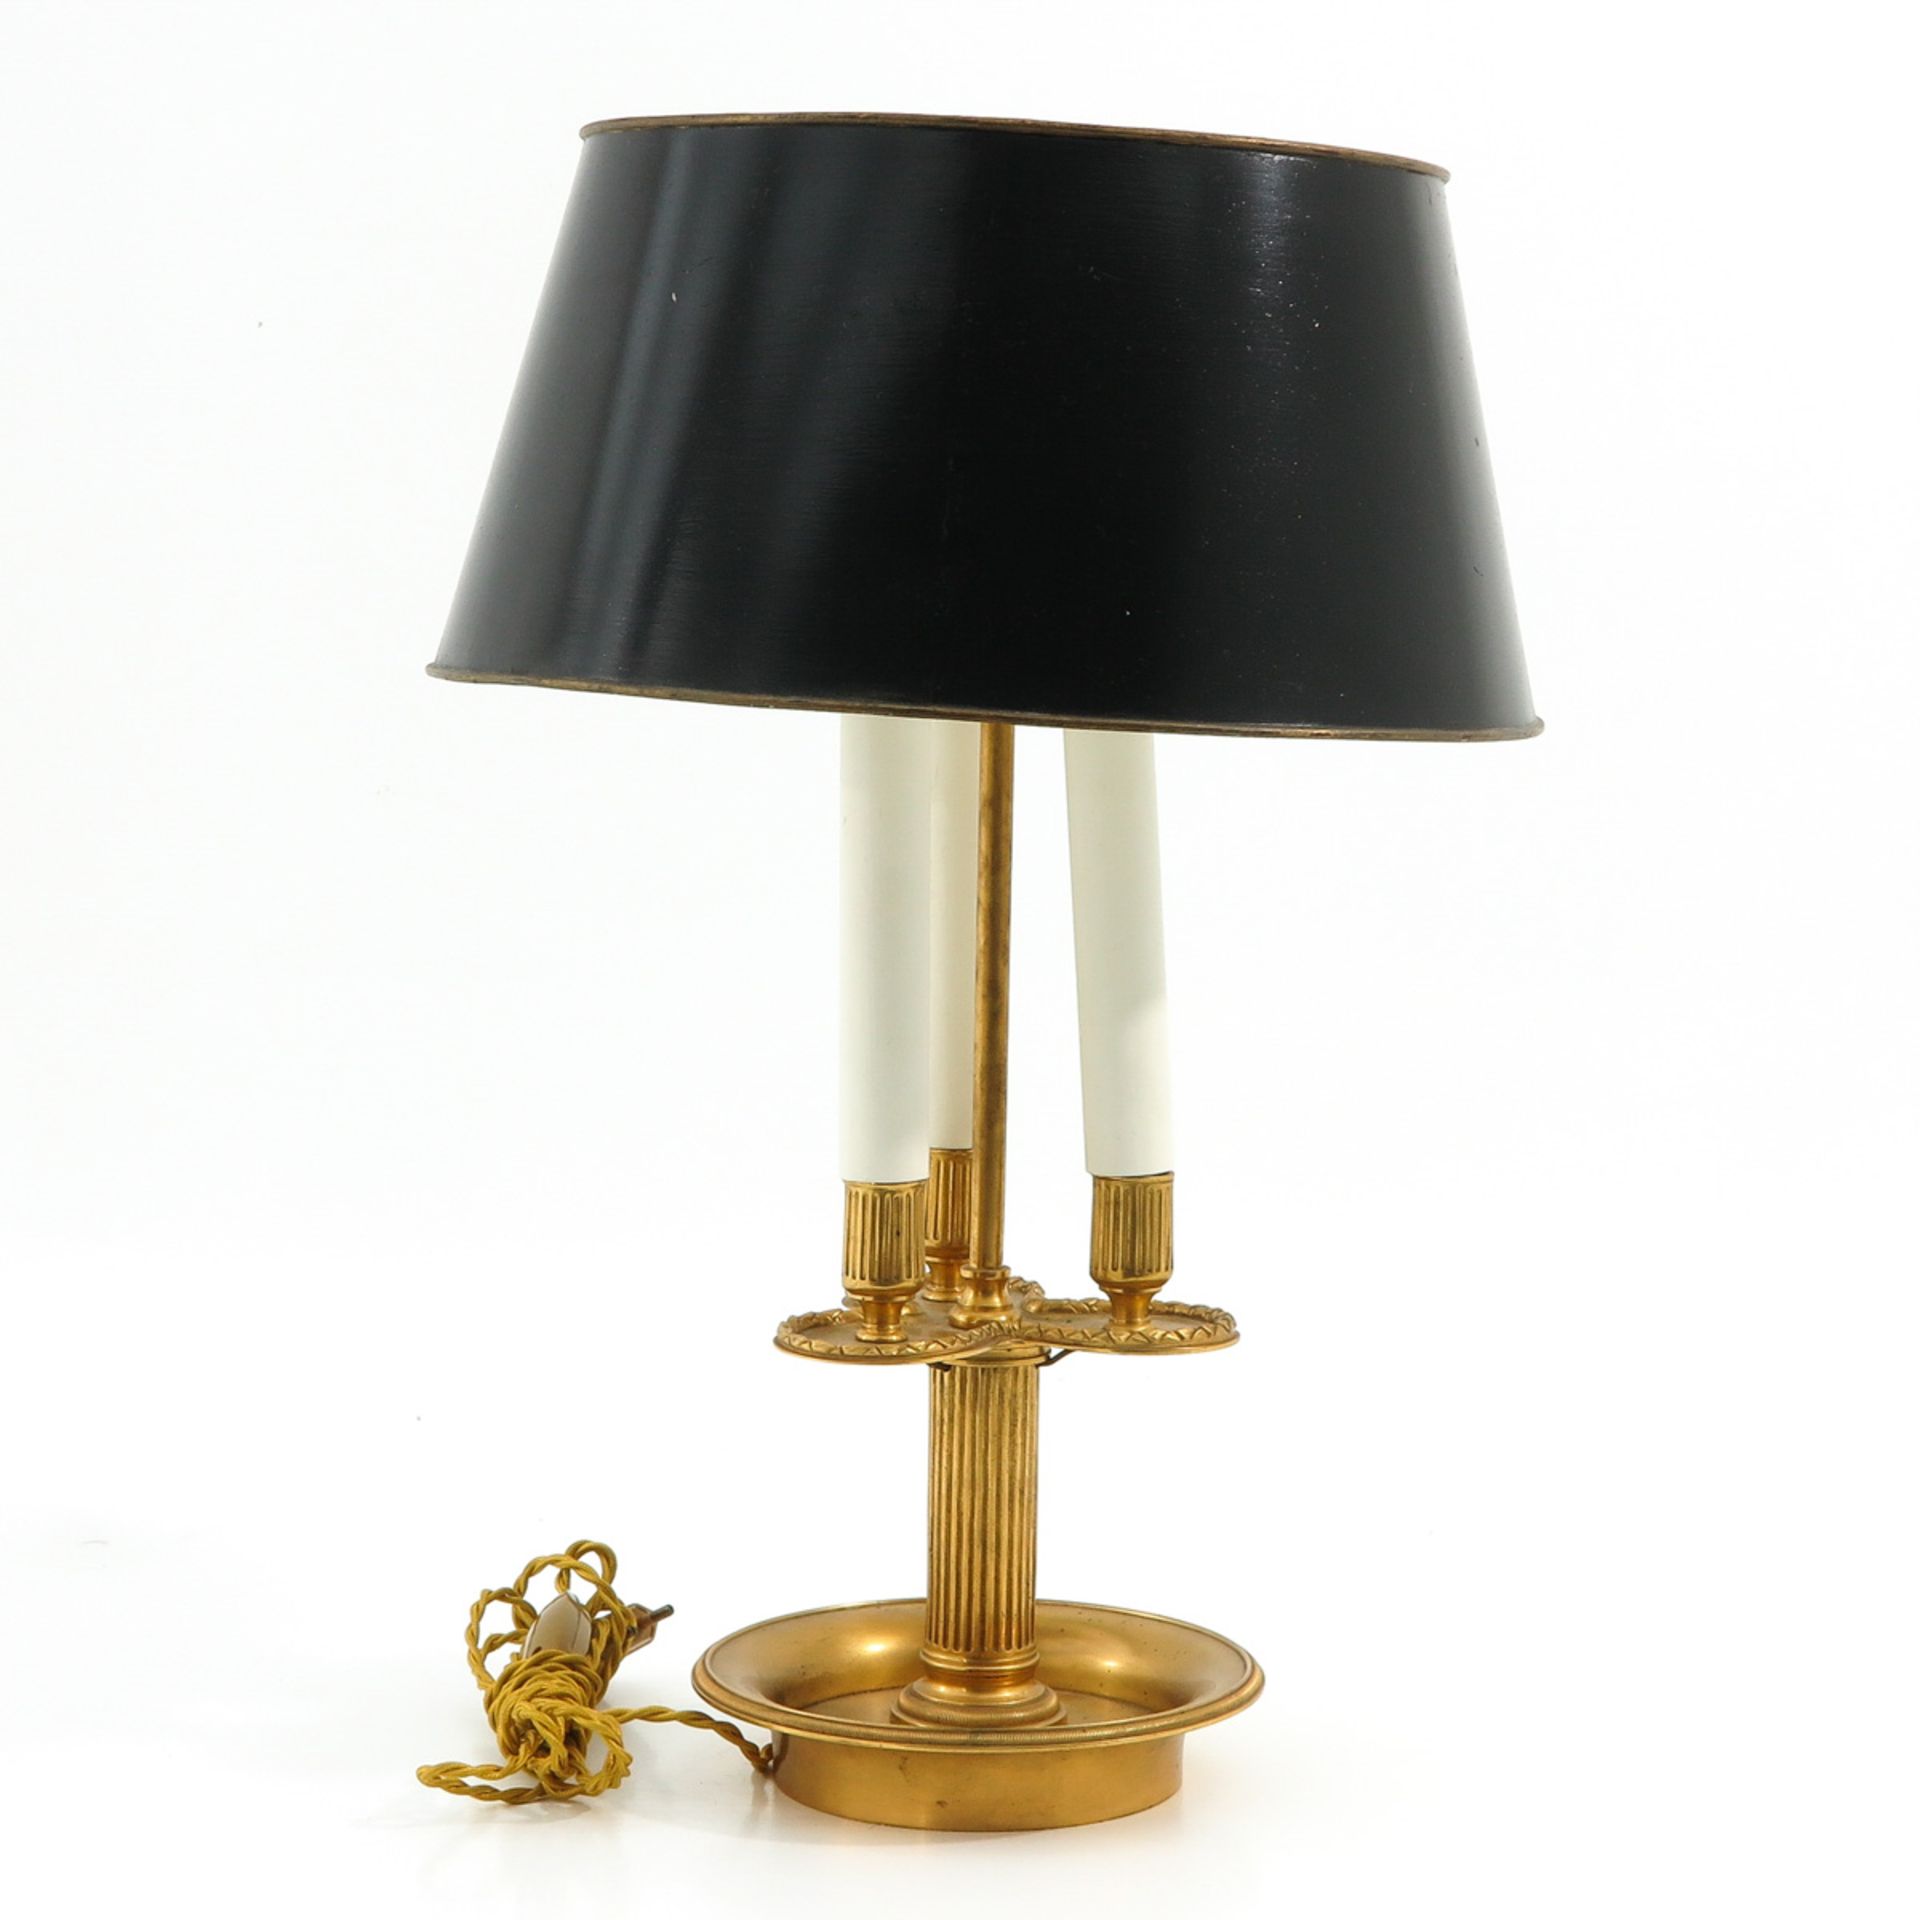 A Table Lamp with Brass Shade - Image 4 of 9